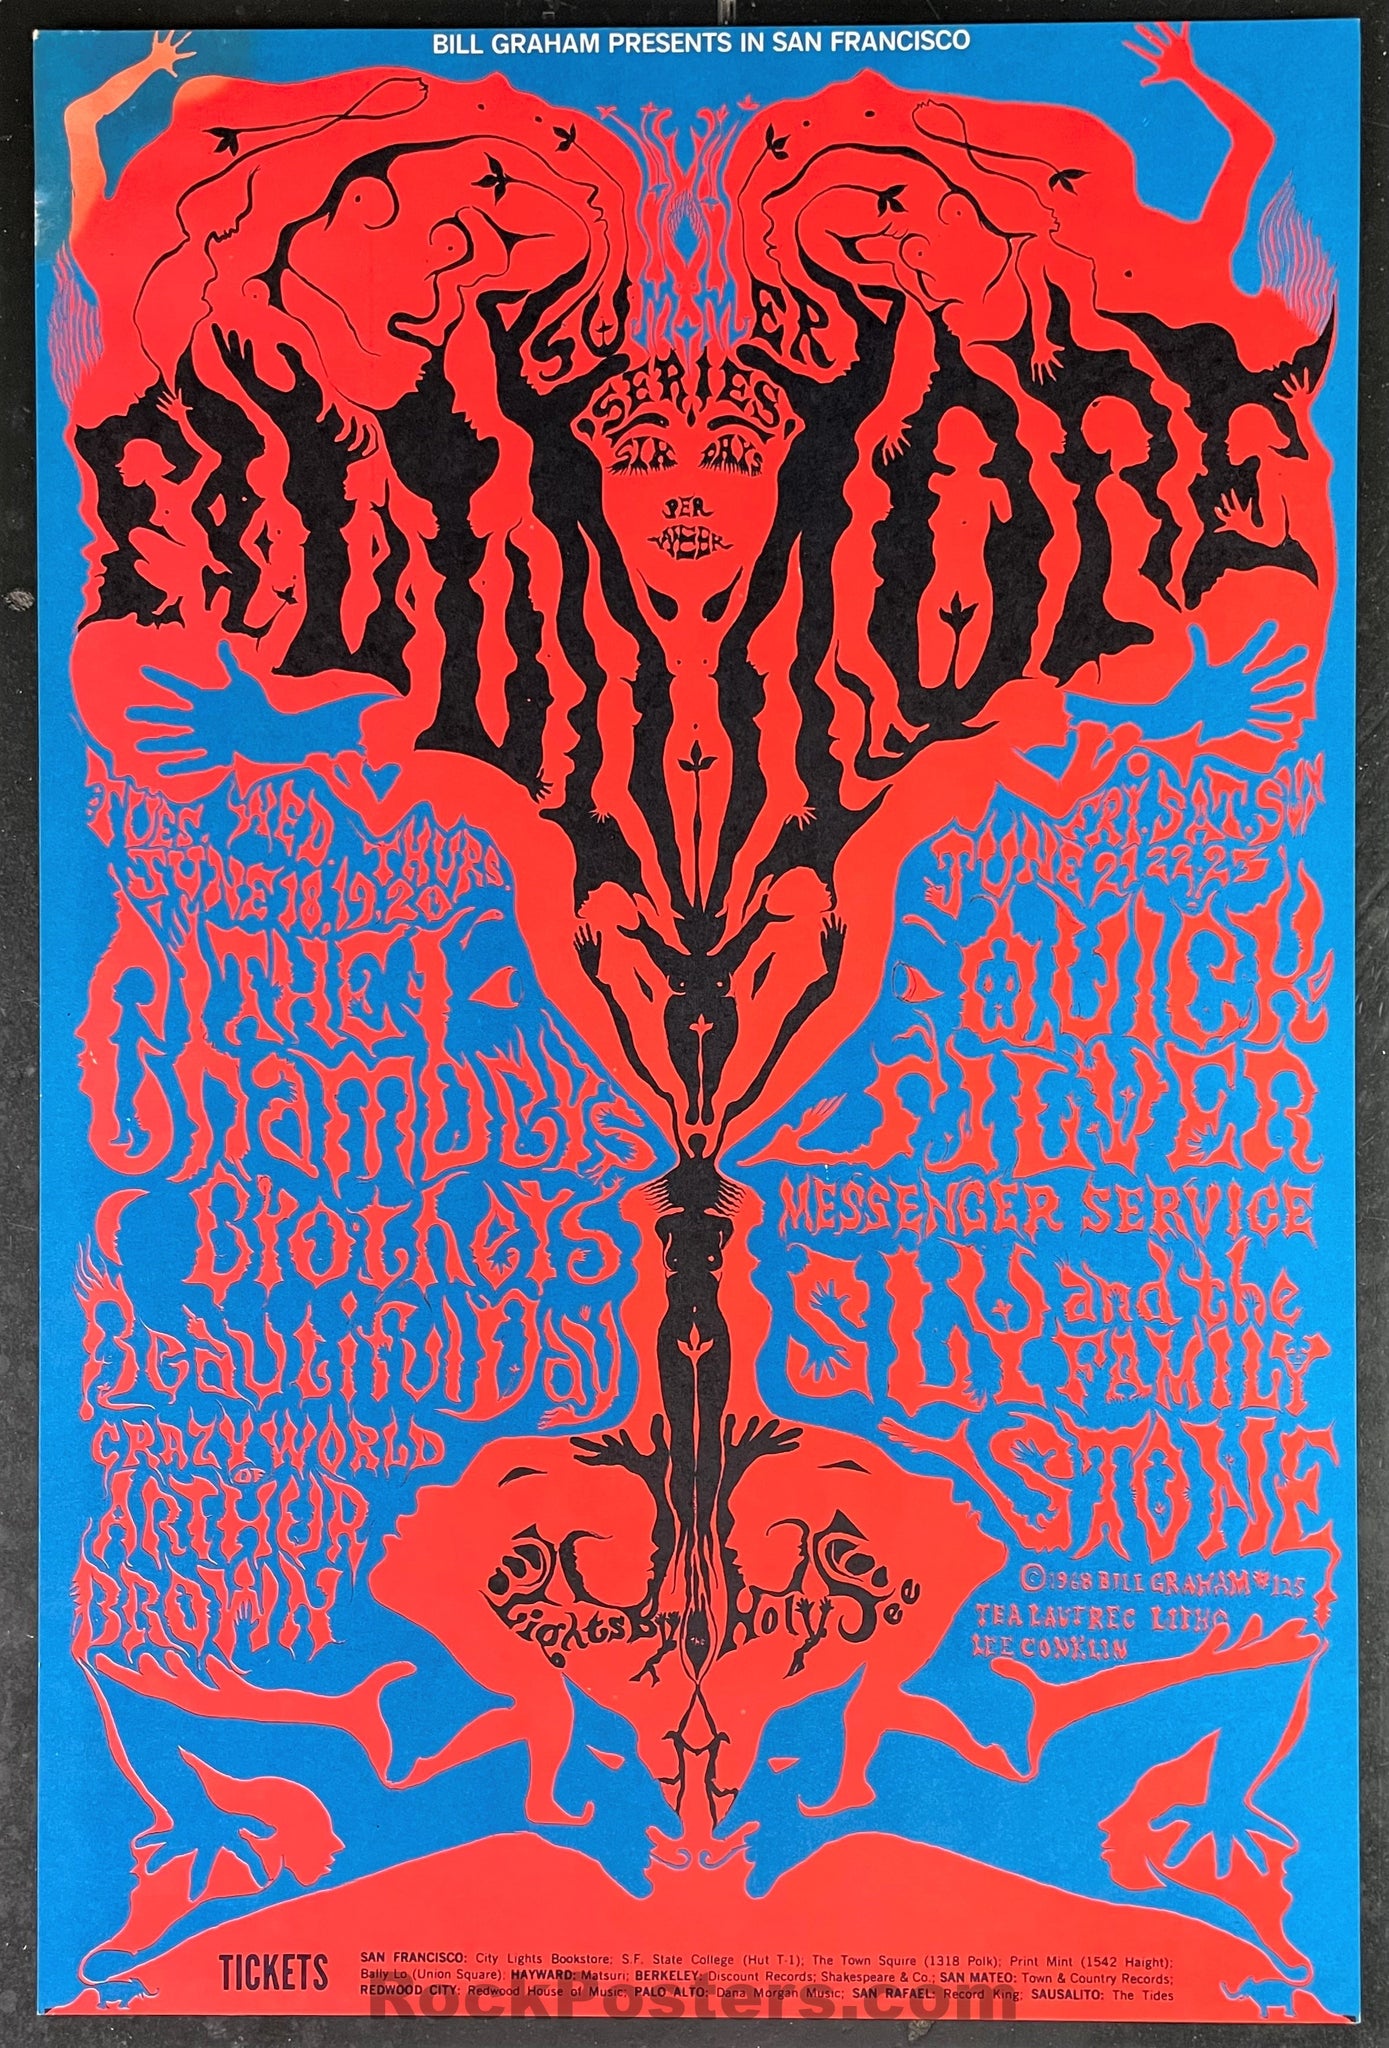 AUCTION - BG-125 - Sly & the Family Stone Quicksilver - 1968 Poster - Fillmore Auditorium - Excellent